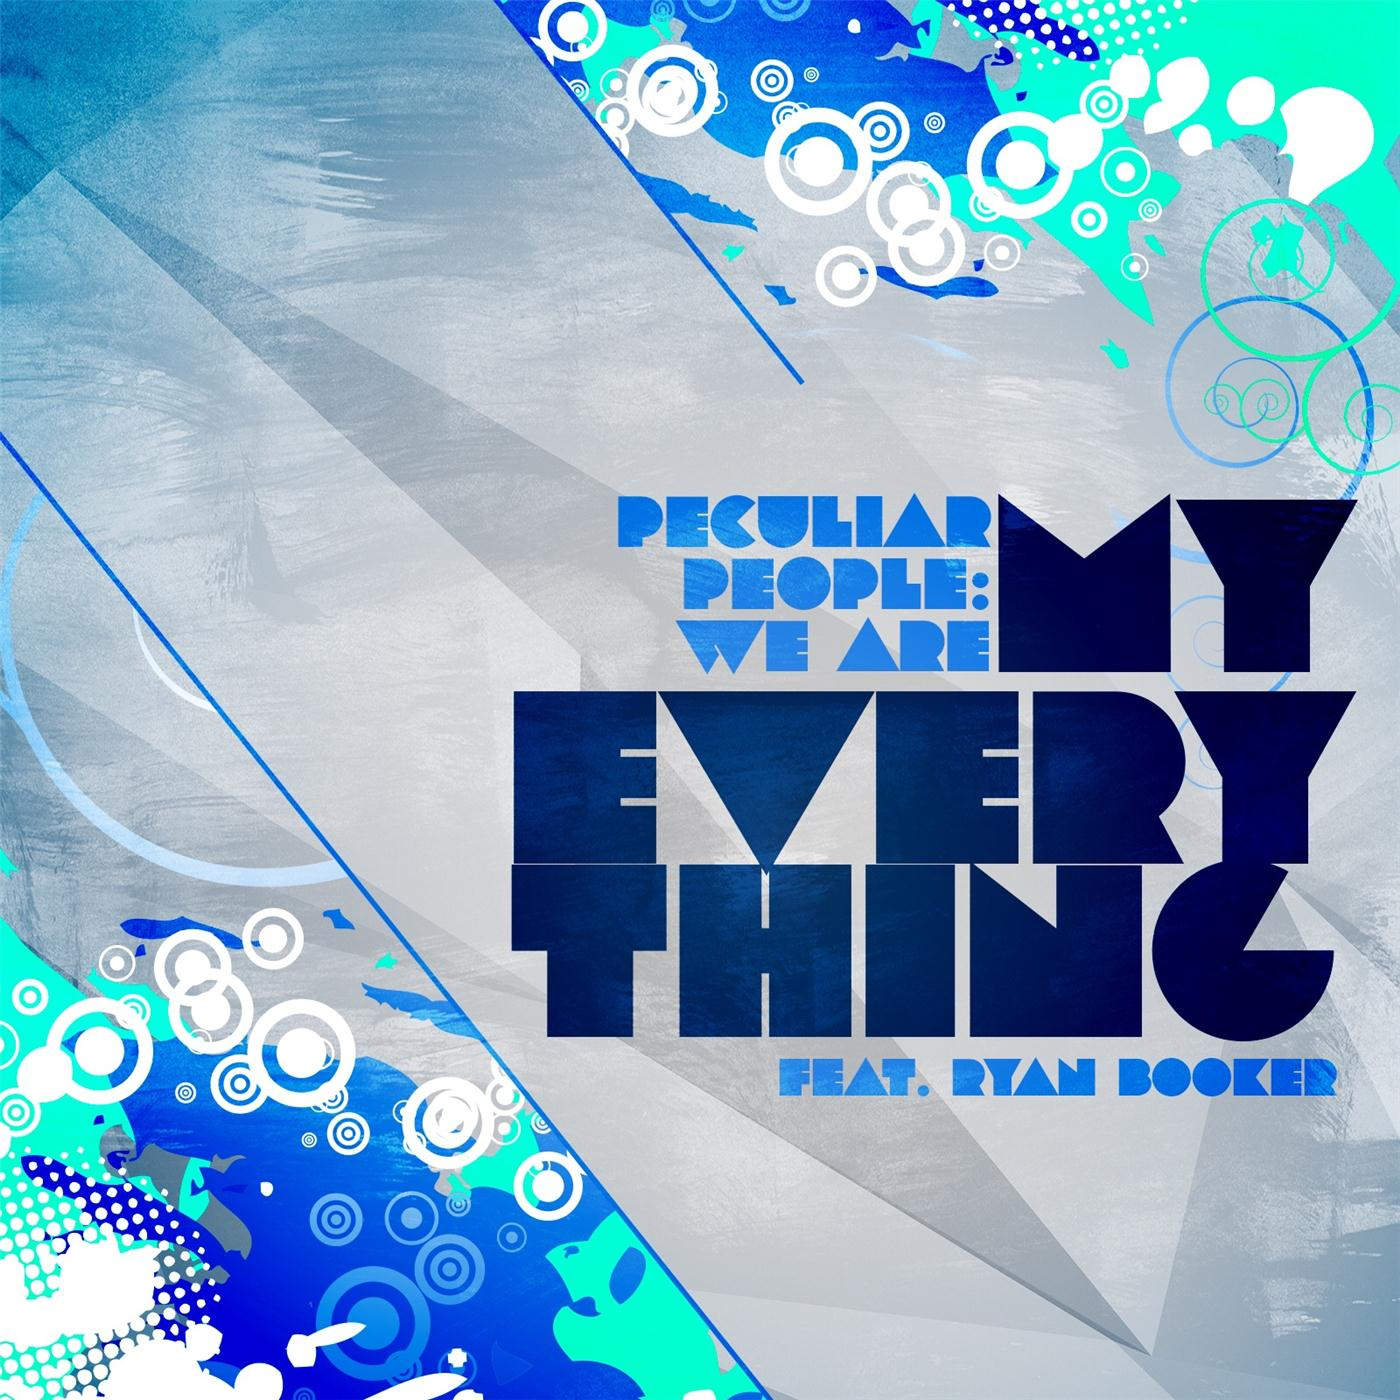 Art for My Everything (feat. Ryan Booker) by Peculiar People: We Are